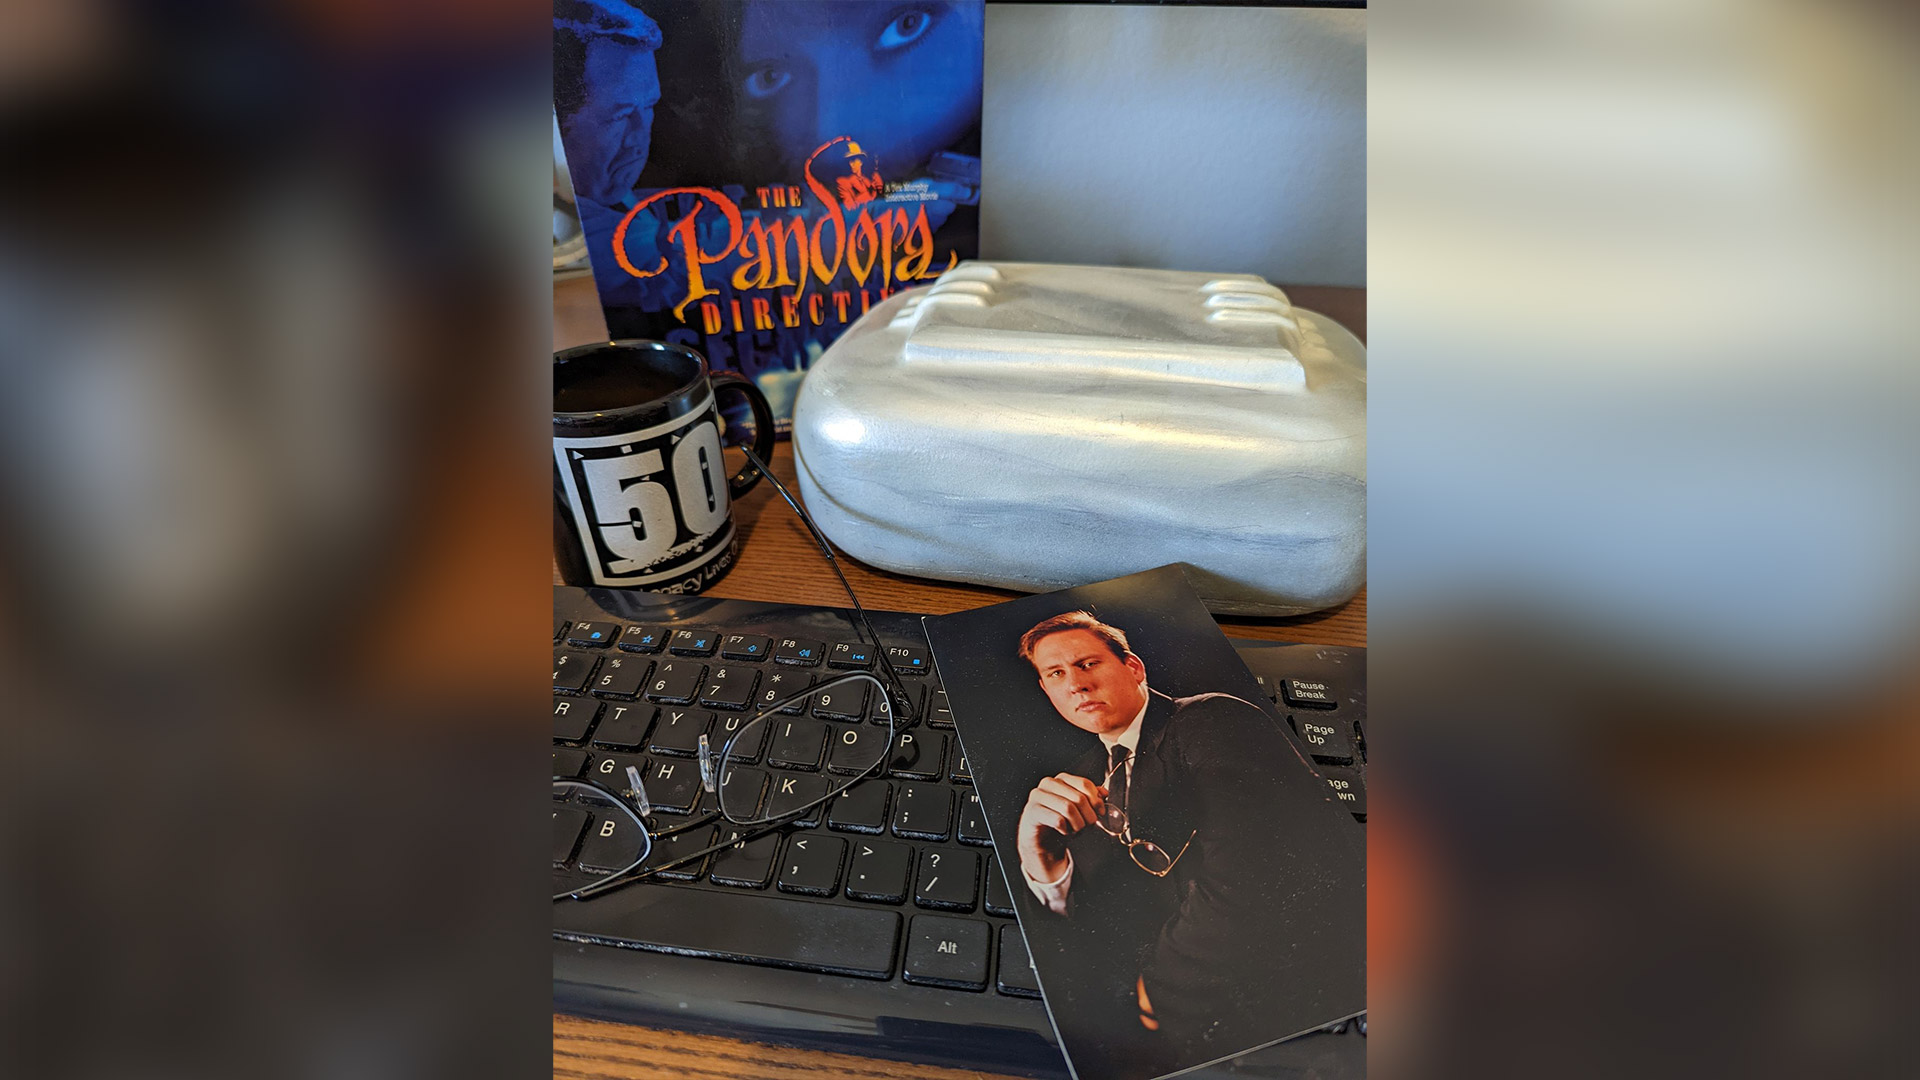 A photo of Mark Hulka from the Under a Killing Moon game boardroom sits on top of a computer keyboard. Around it are: a pair of glasses, a coffee mug, one of the Pandora Directive Puzzle box props, and an original Pandora Directive big box game box.